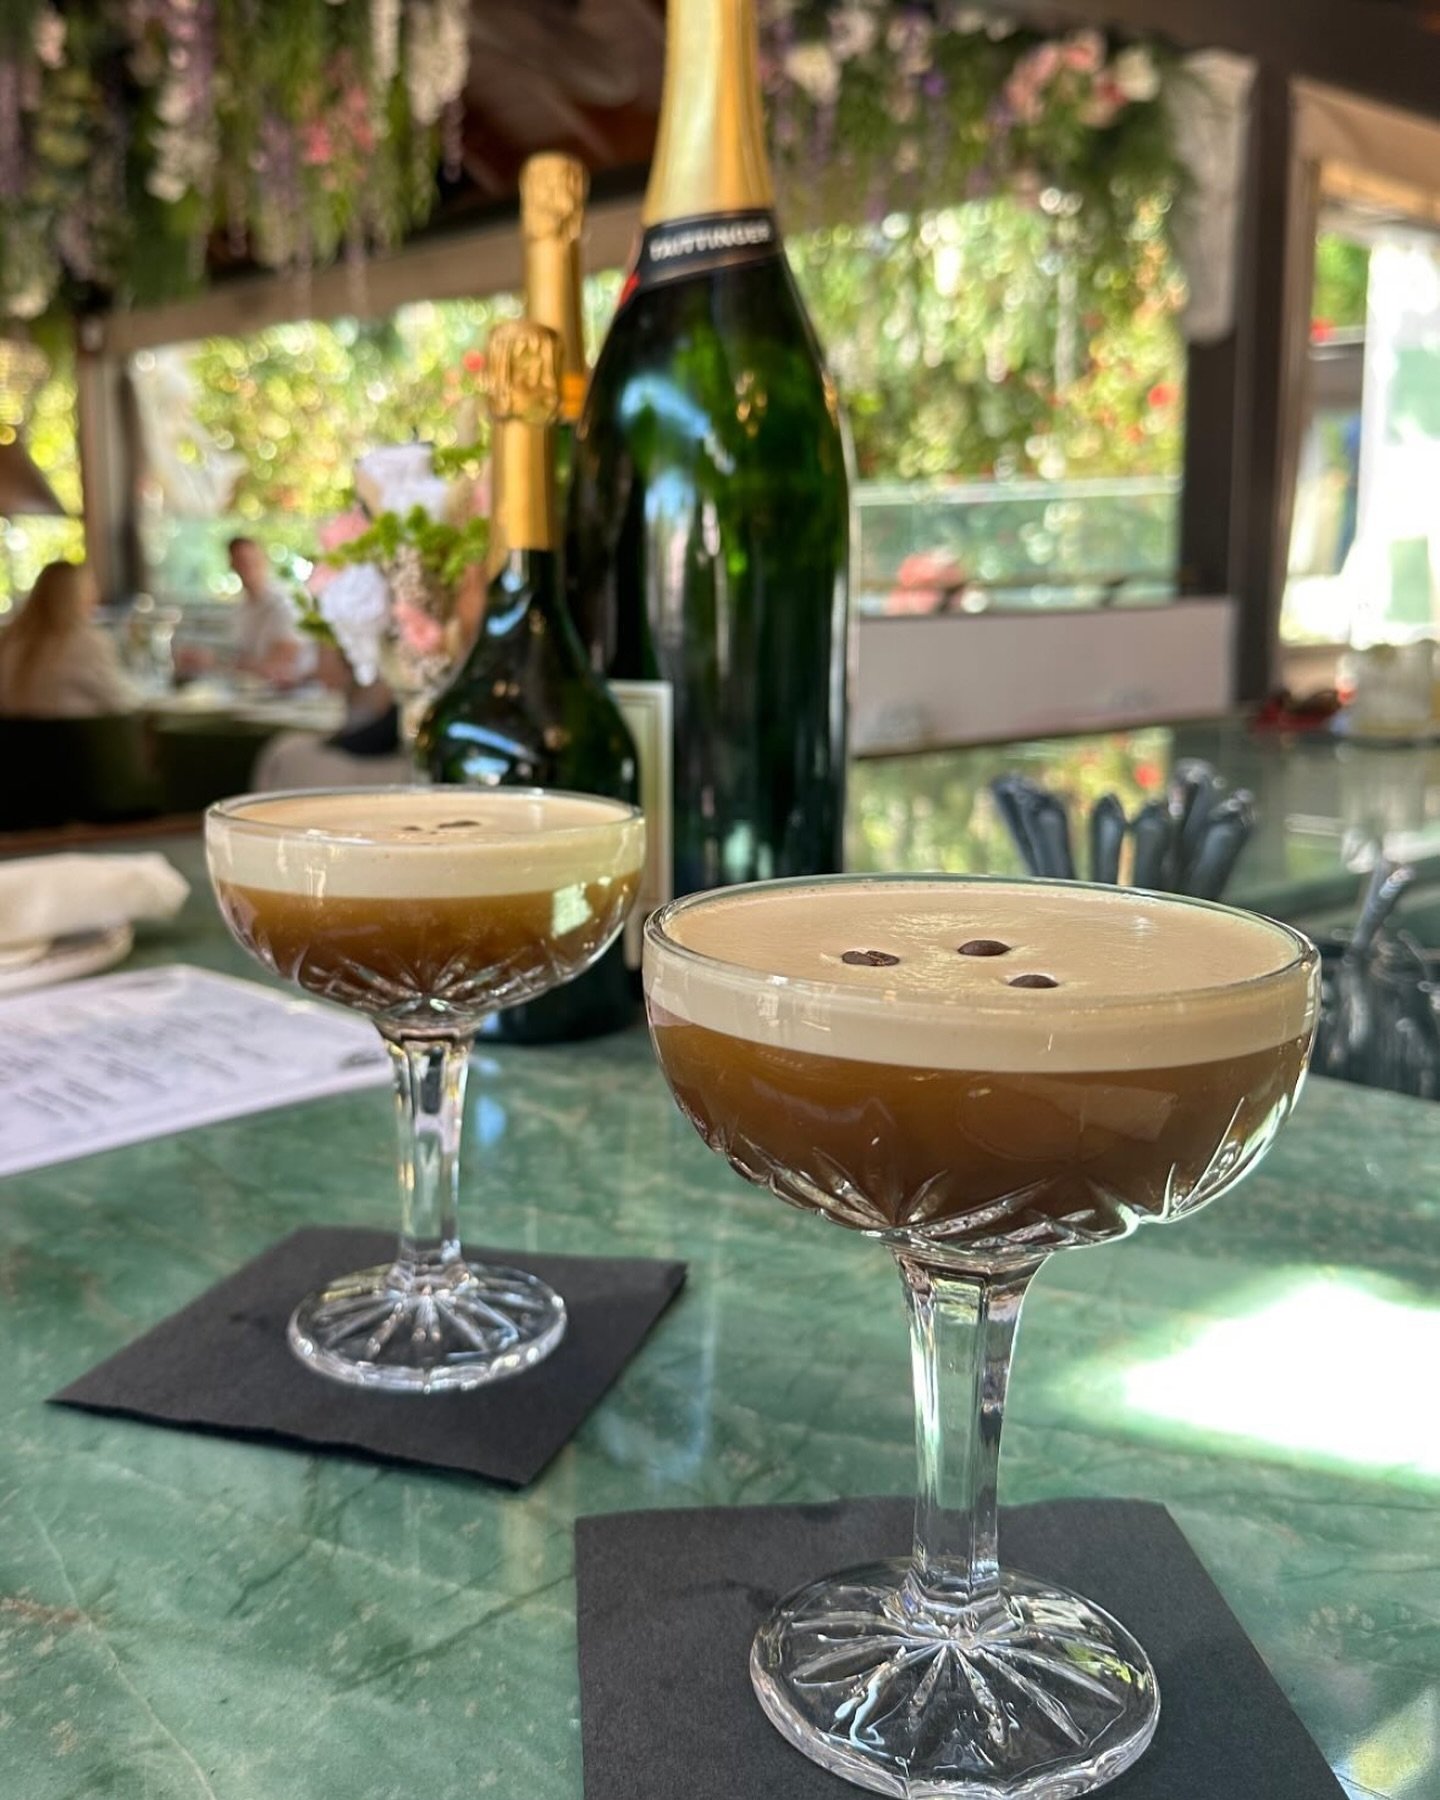 Already dreaming about next weekend&rsquo;s brunchtime Espresso Martini 

📸 @ohyeahdiane